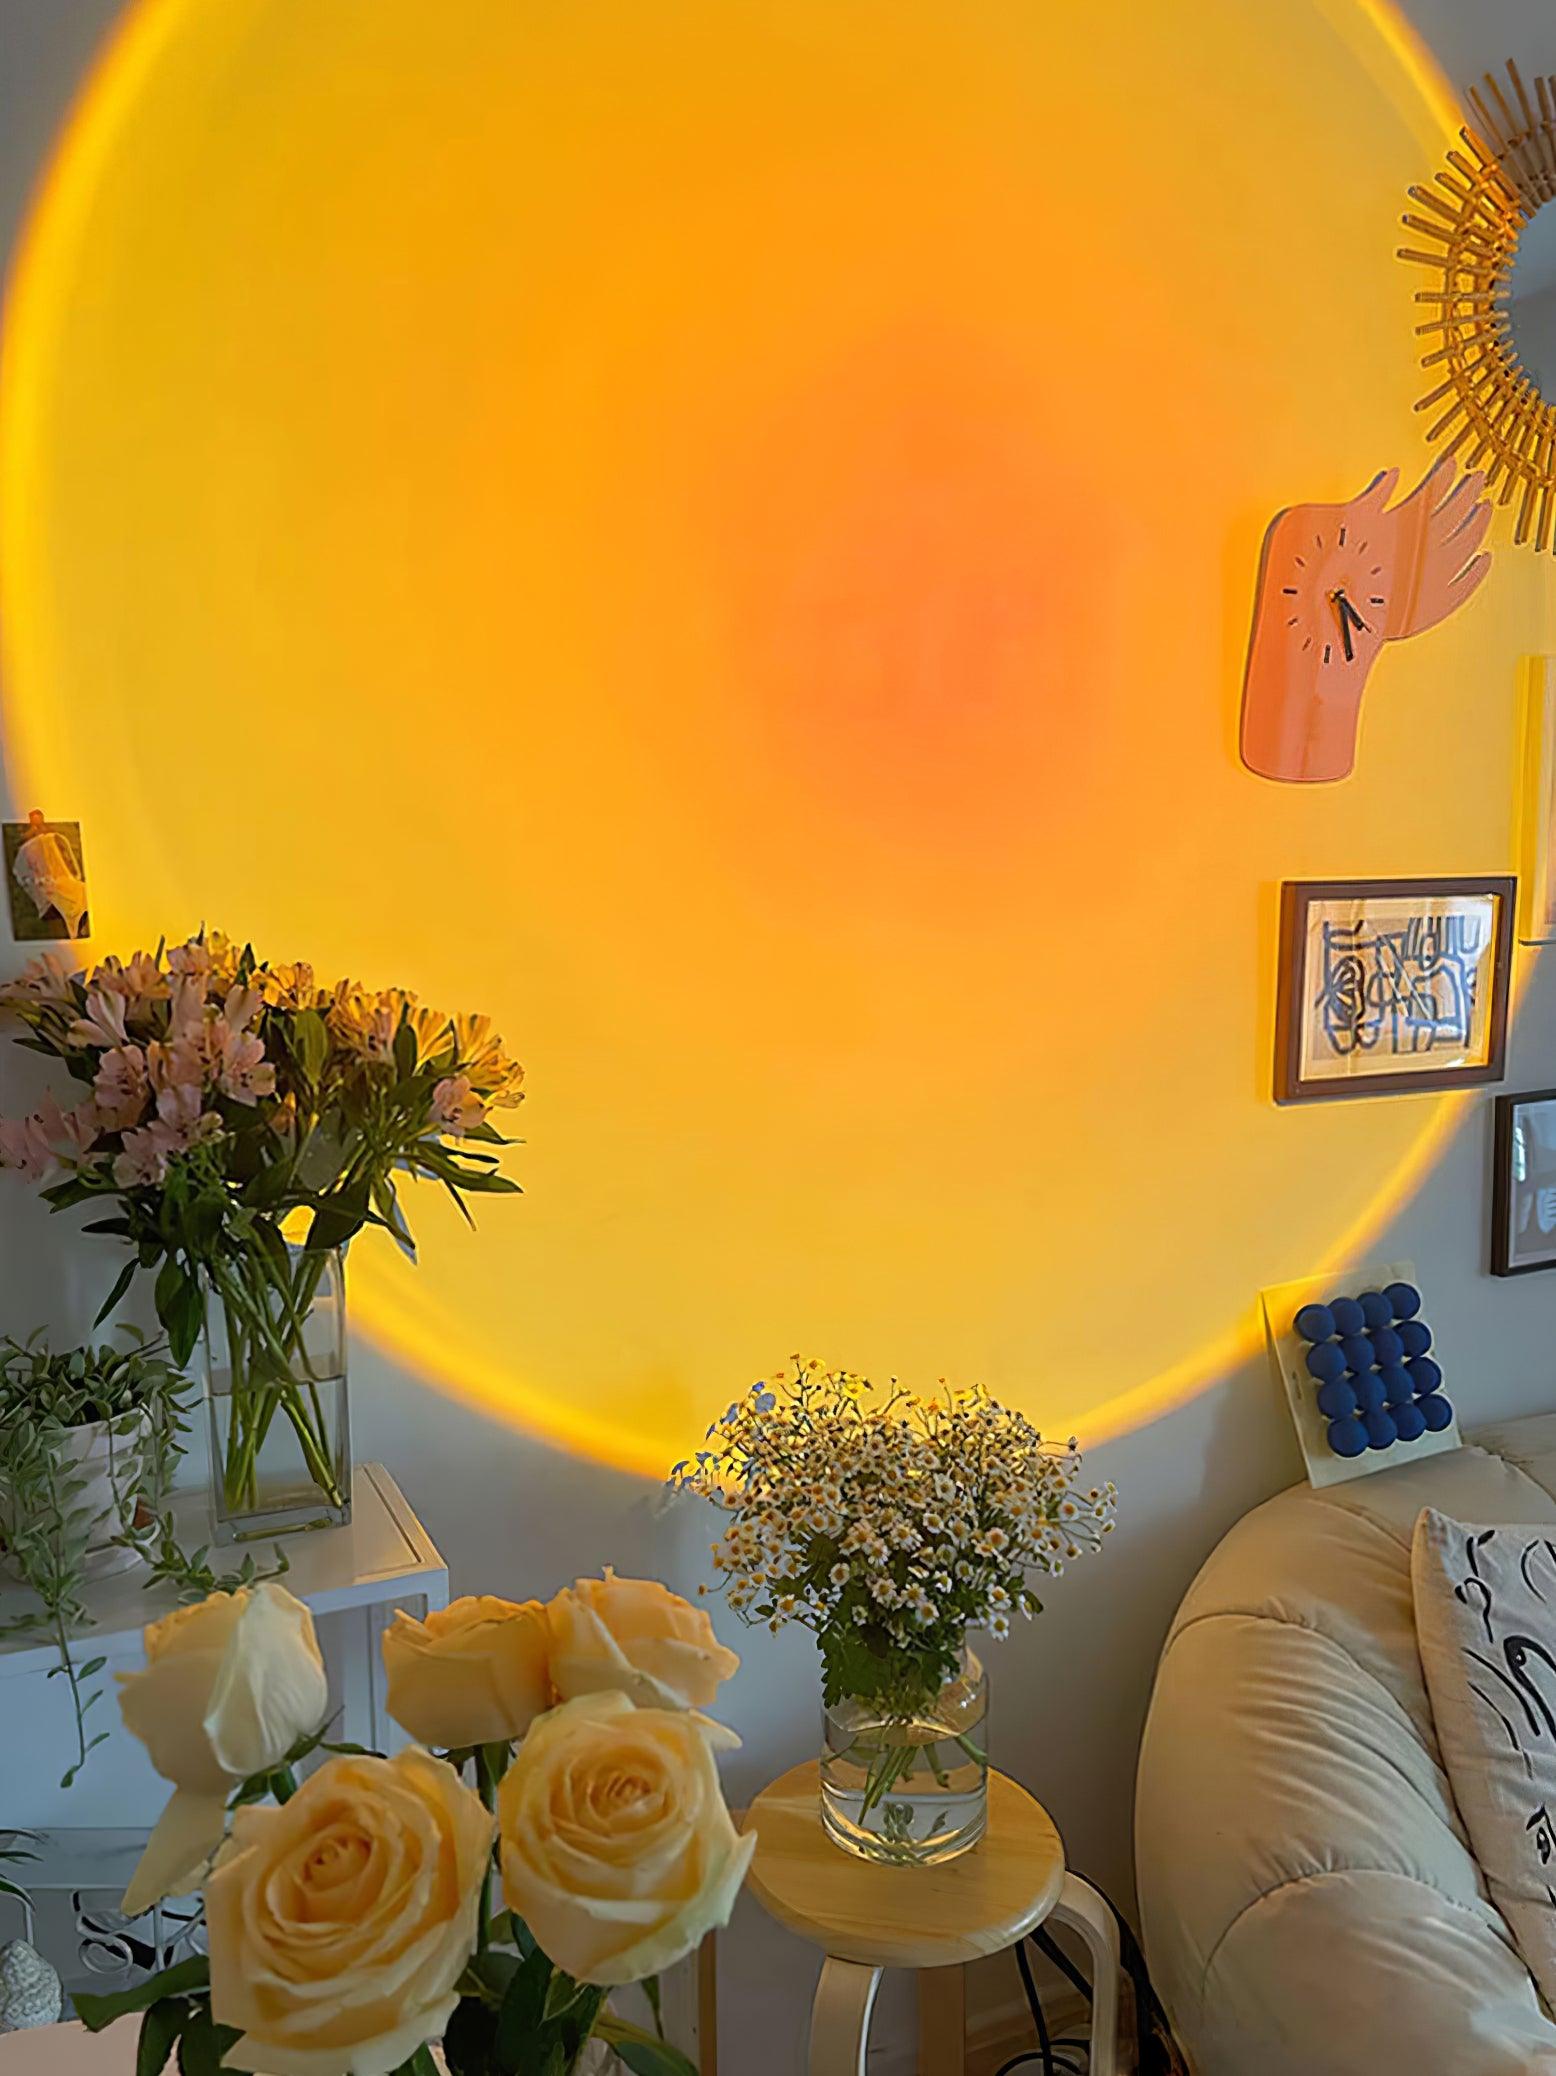 Home Haven - Sunset Lamp Projector